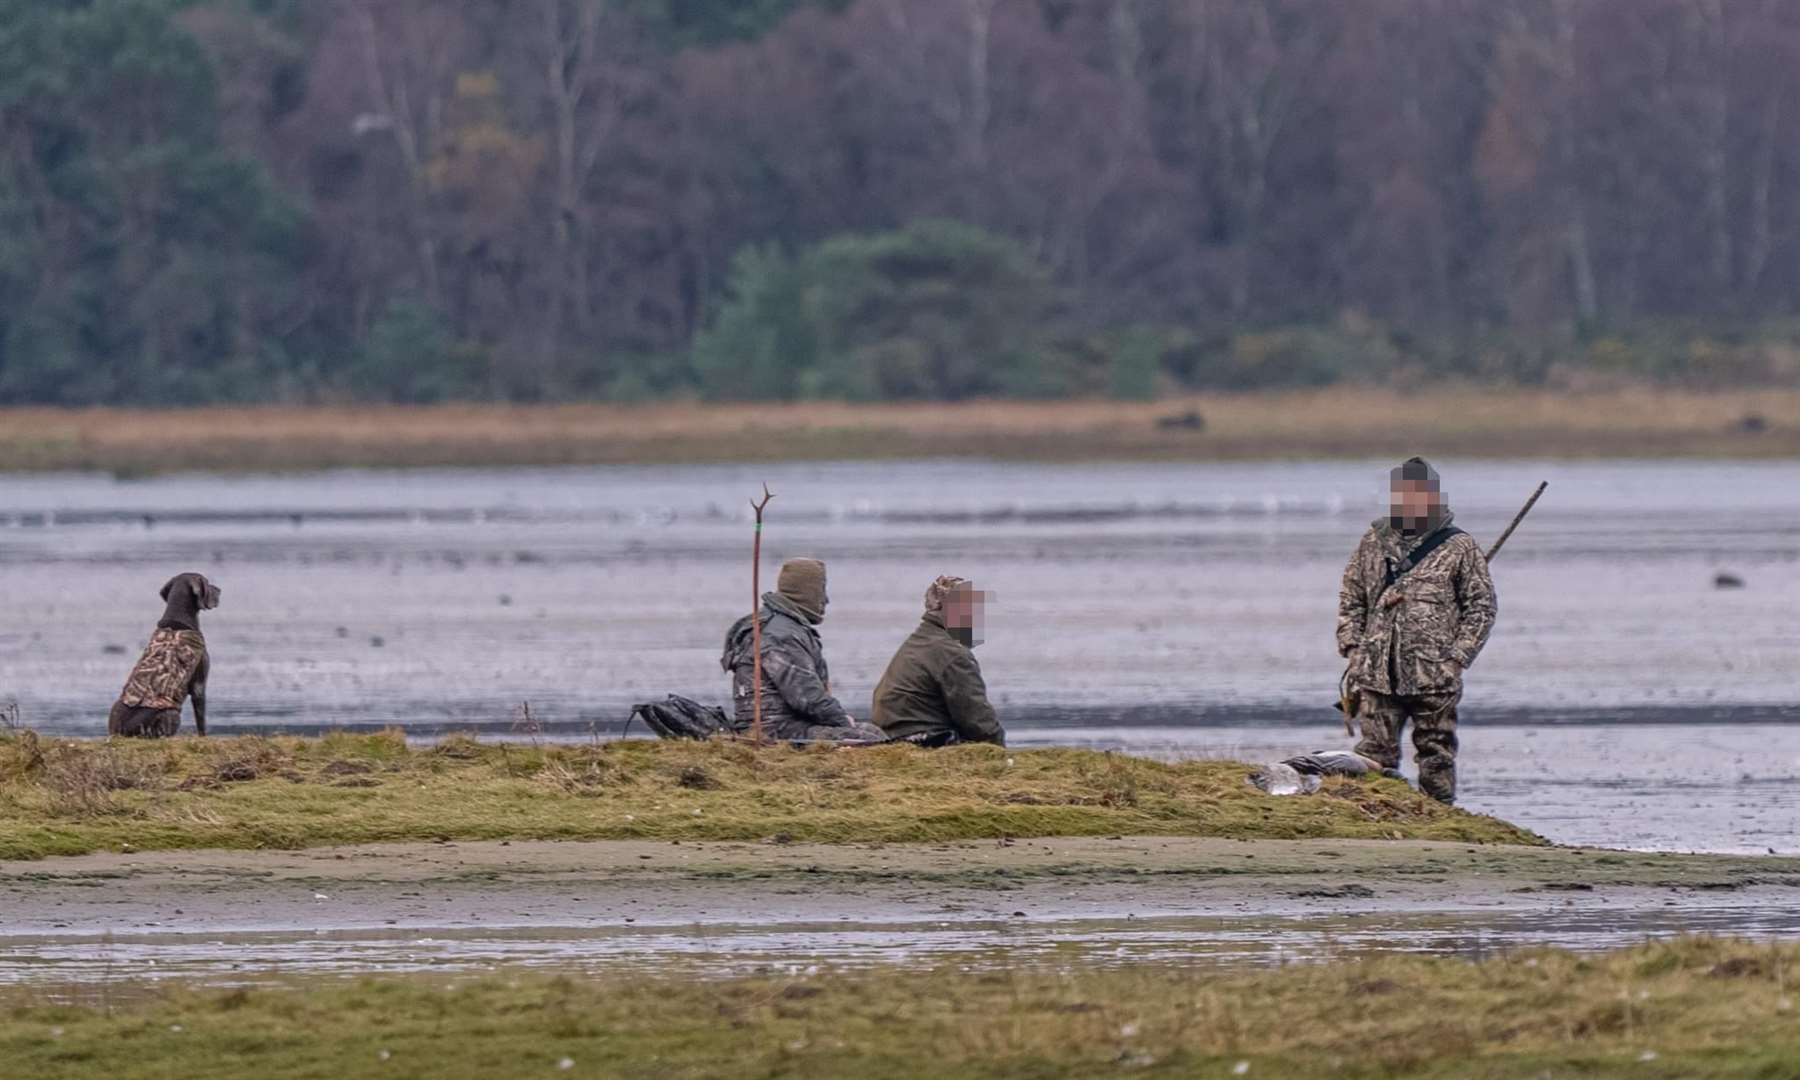 Wildfowlers at Findhorn Bay ignoring the protection advice.